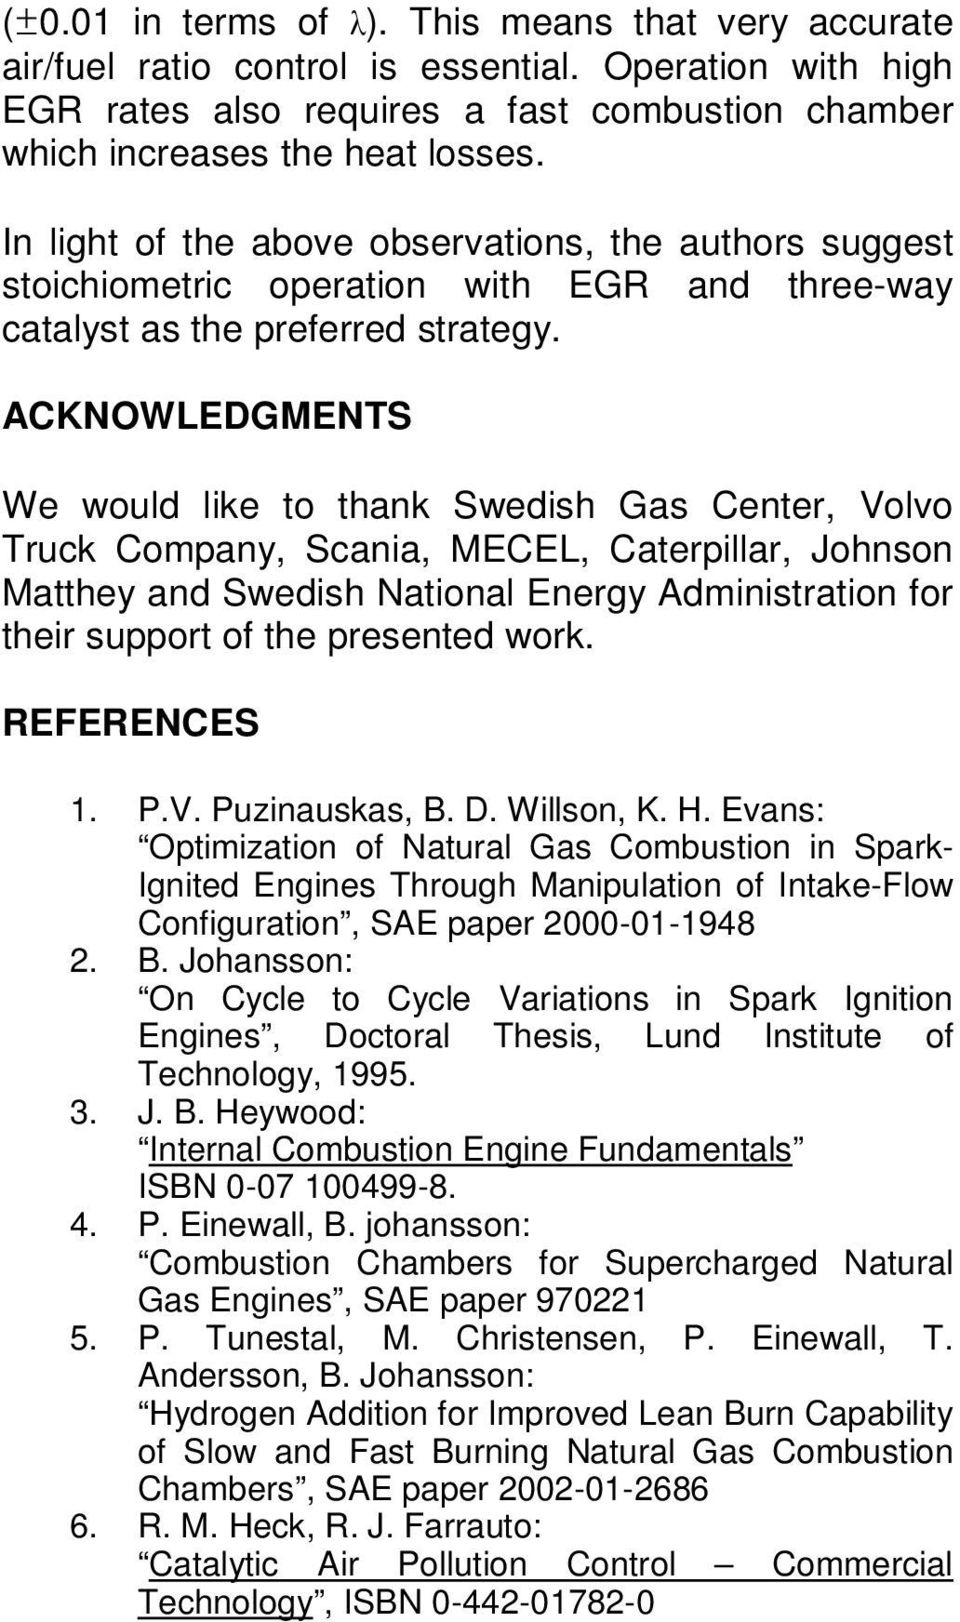 ACKNOWLEDGMENTS We would like to thank Swedish Gas Center, Volvo Truck Company, Scania, MECEL, Caterpillar, Johnson Matthey and Swedish National Energy Administration for their support of the